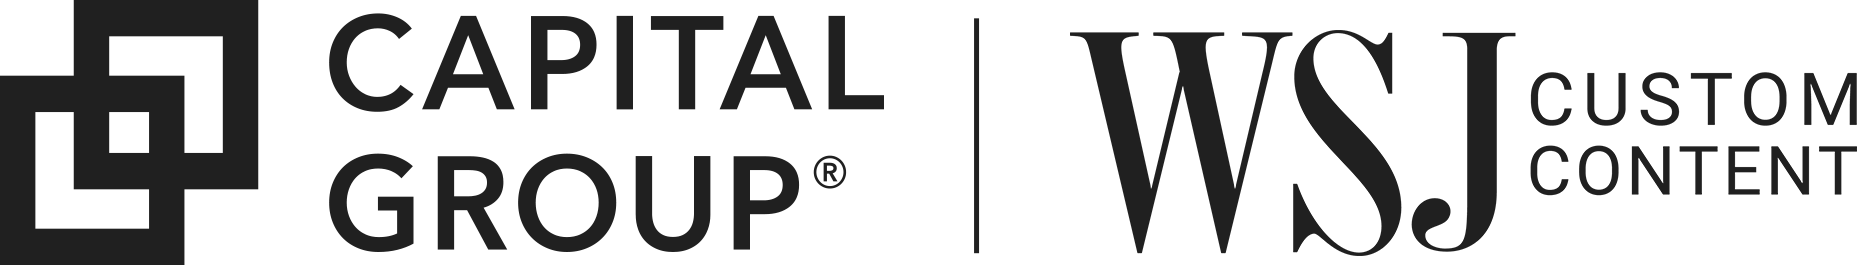 The logo image includes two overlapping square outlines, one in blue and one in gray above text that says Capital Group® directly underneath, and text that says American Funds® to the right of it.